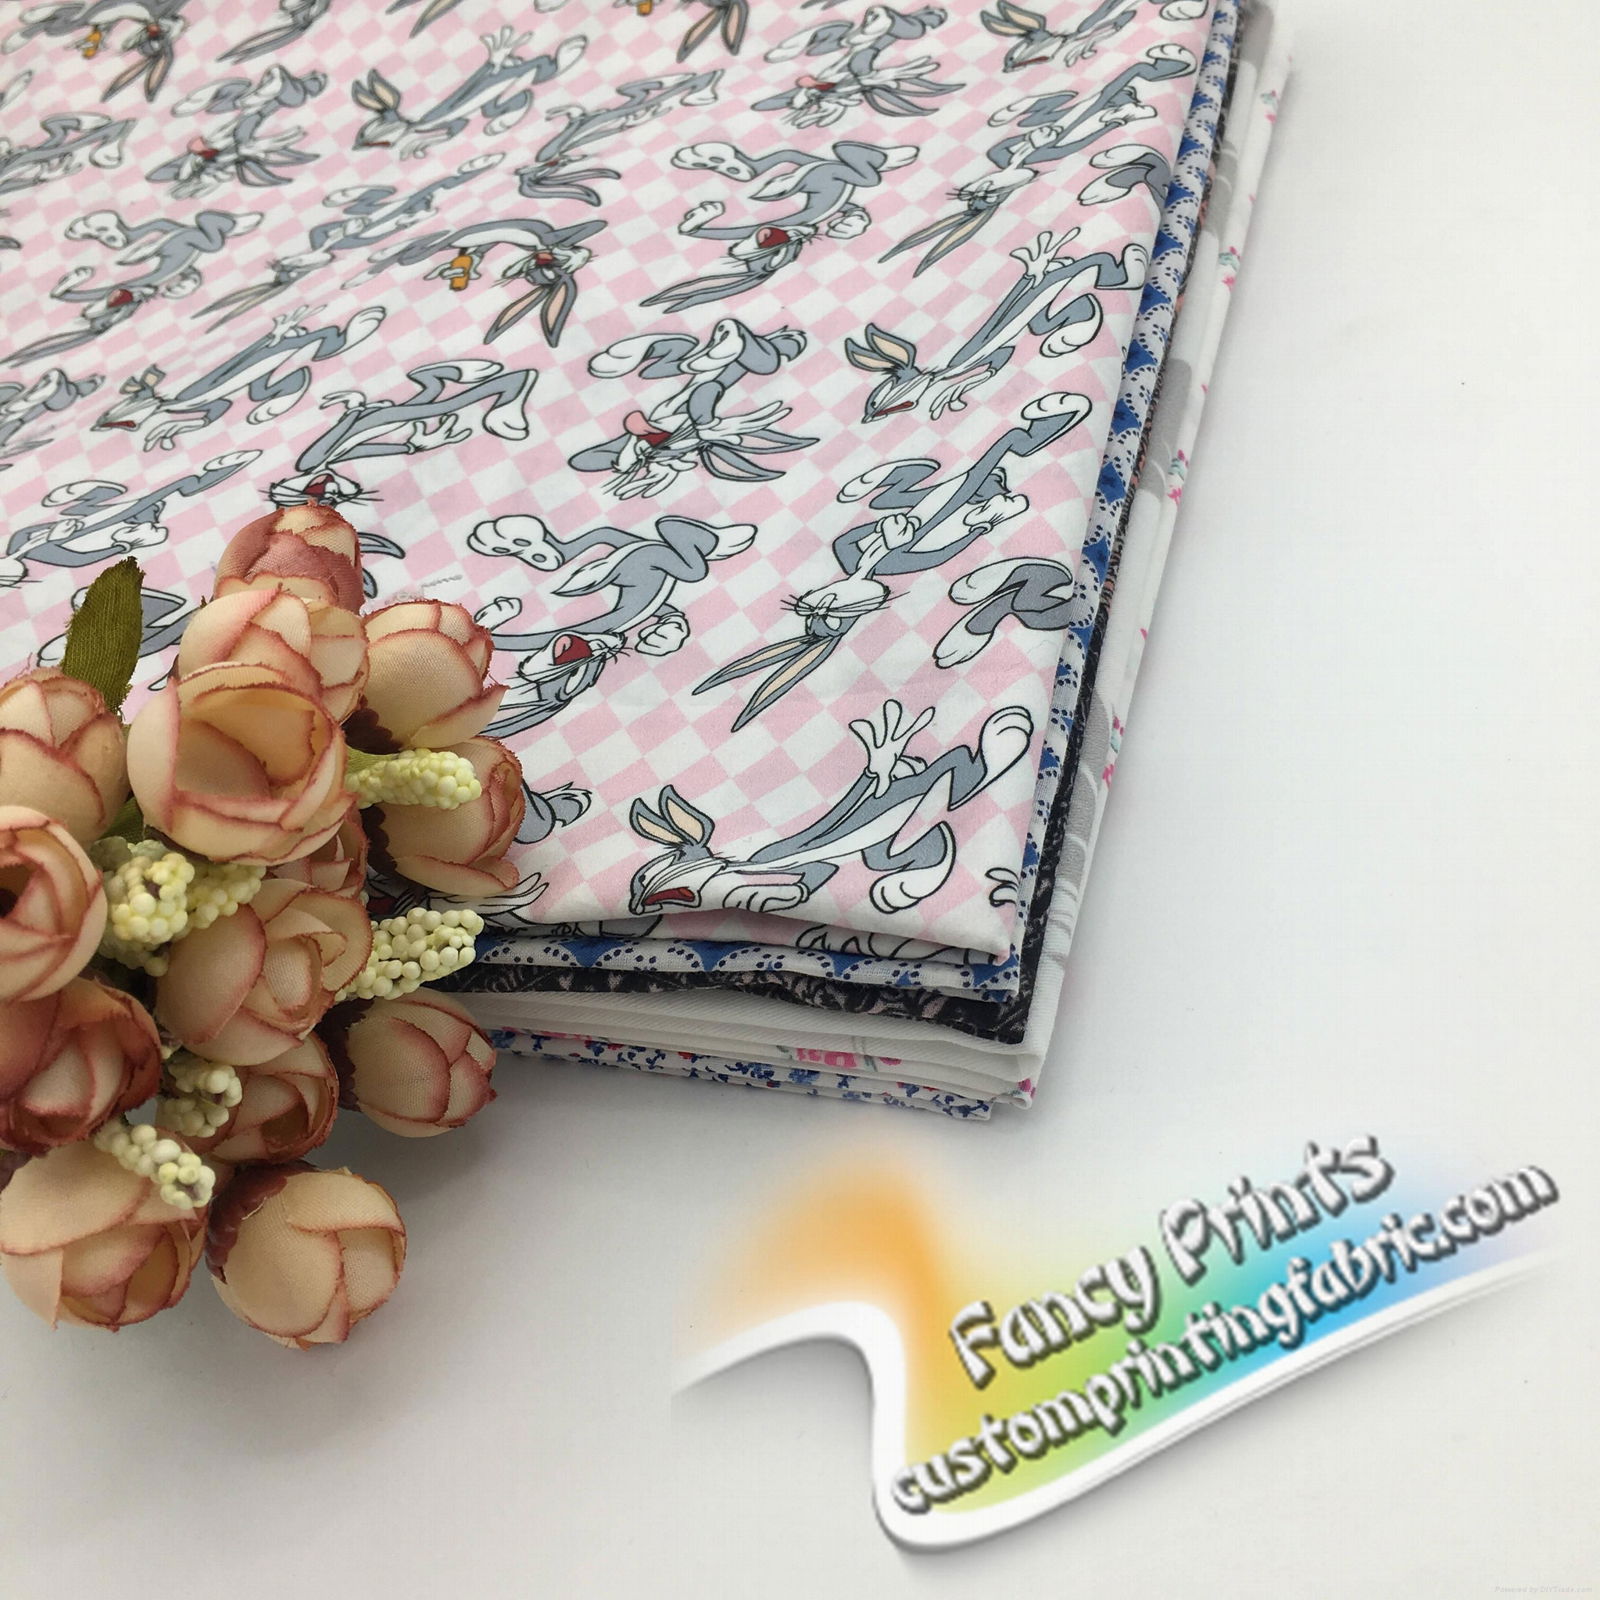 Guaranteed quality proper price cotton fabric for shirting